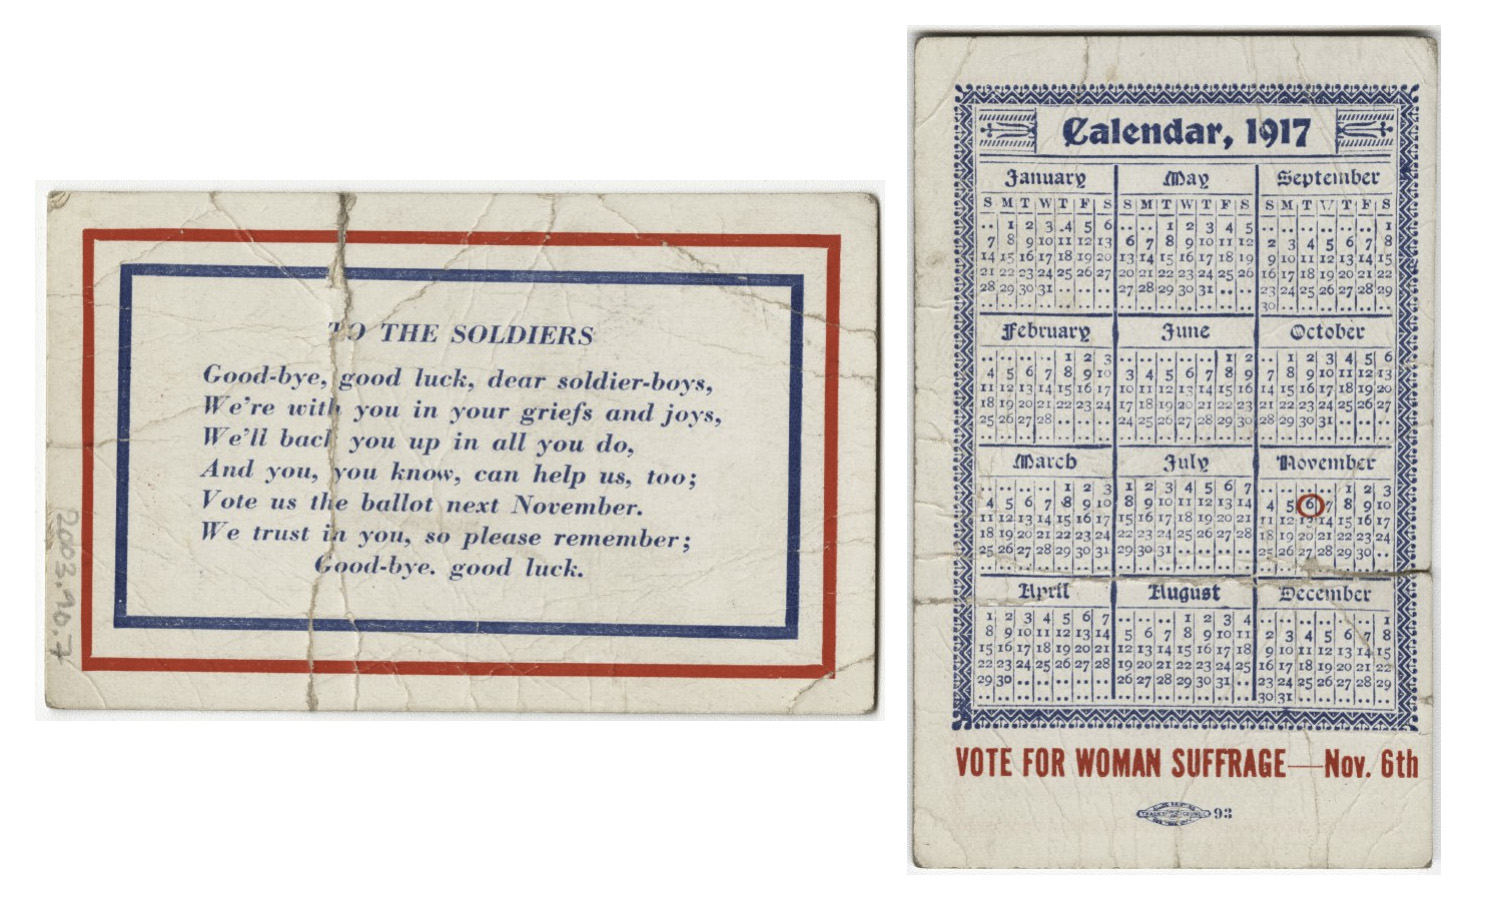 Scans of a vintage card printed with a pro-suffrage message and a mini calendar